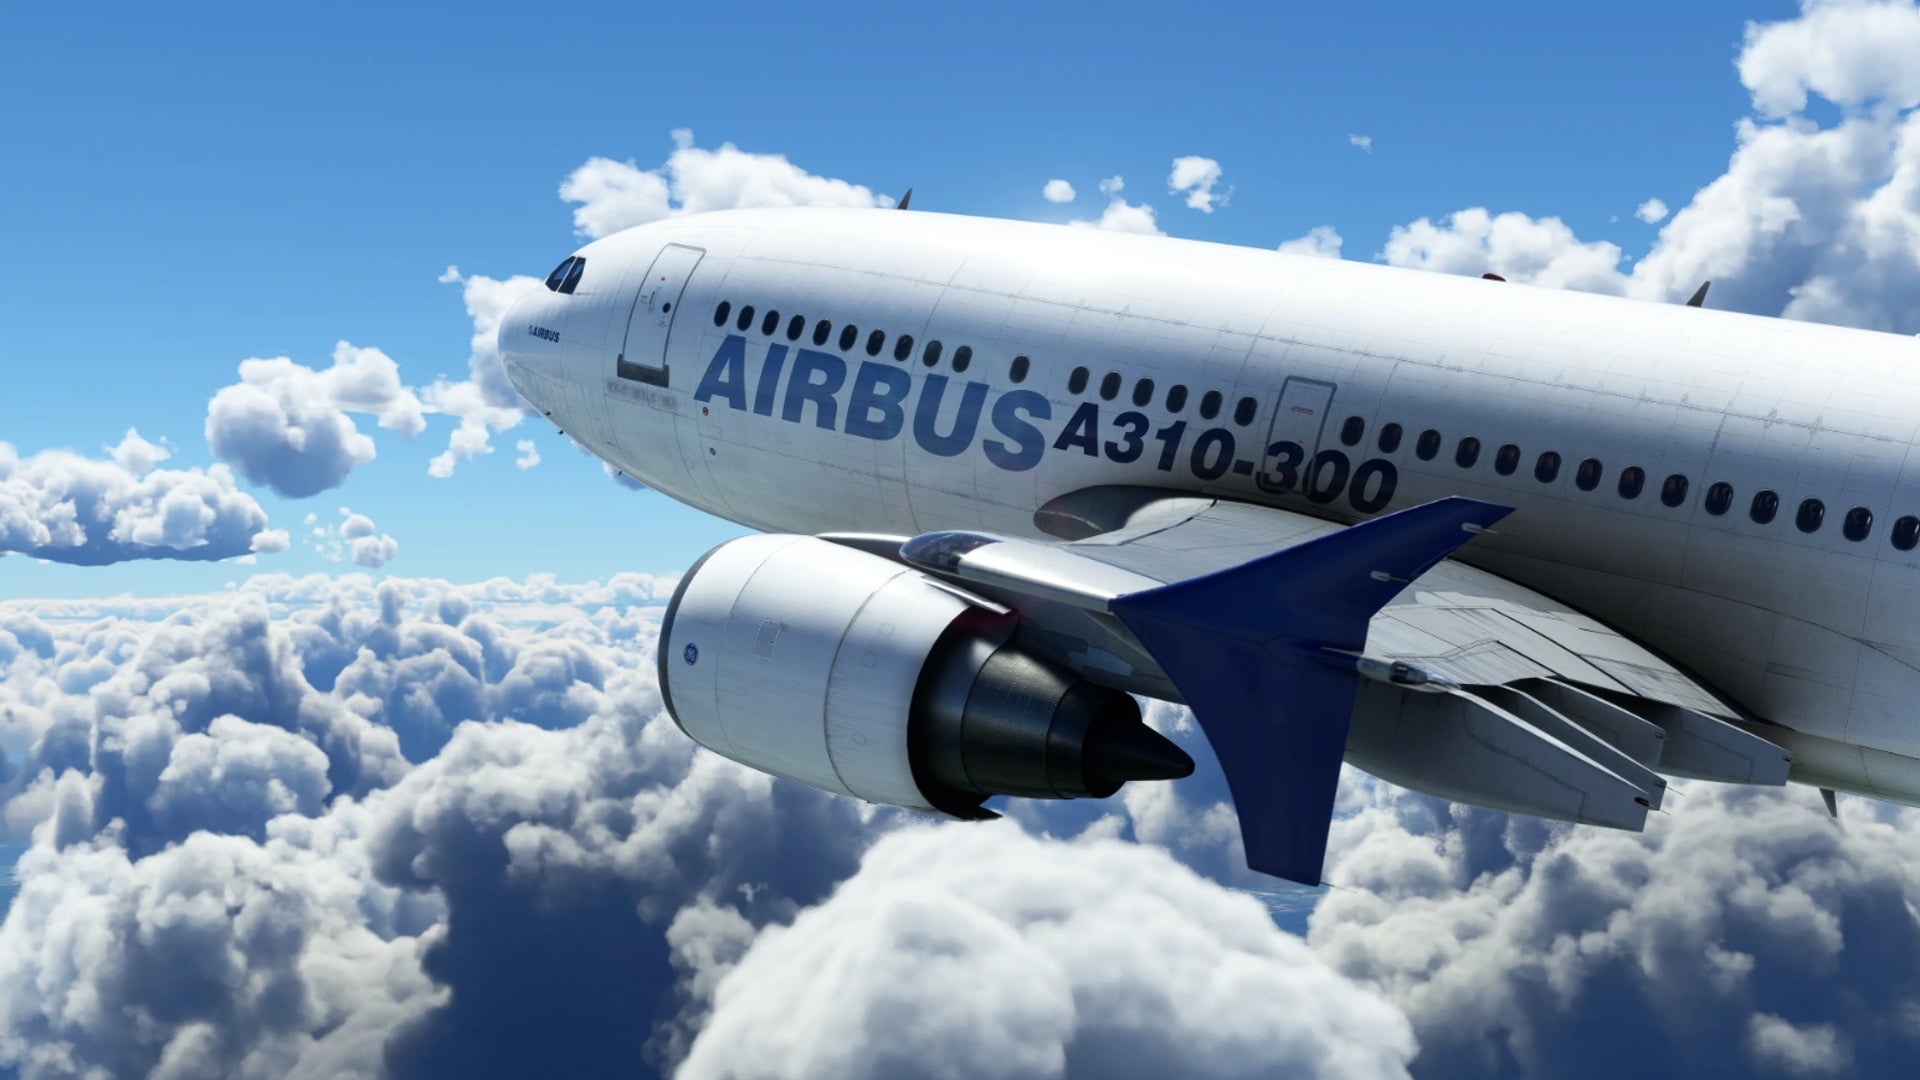 A screenshot from Microsoft Flight Simulator's 40th Anniversary update showing the new Airbus A310